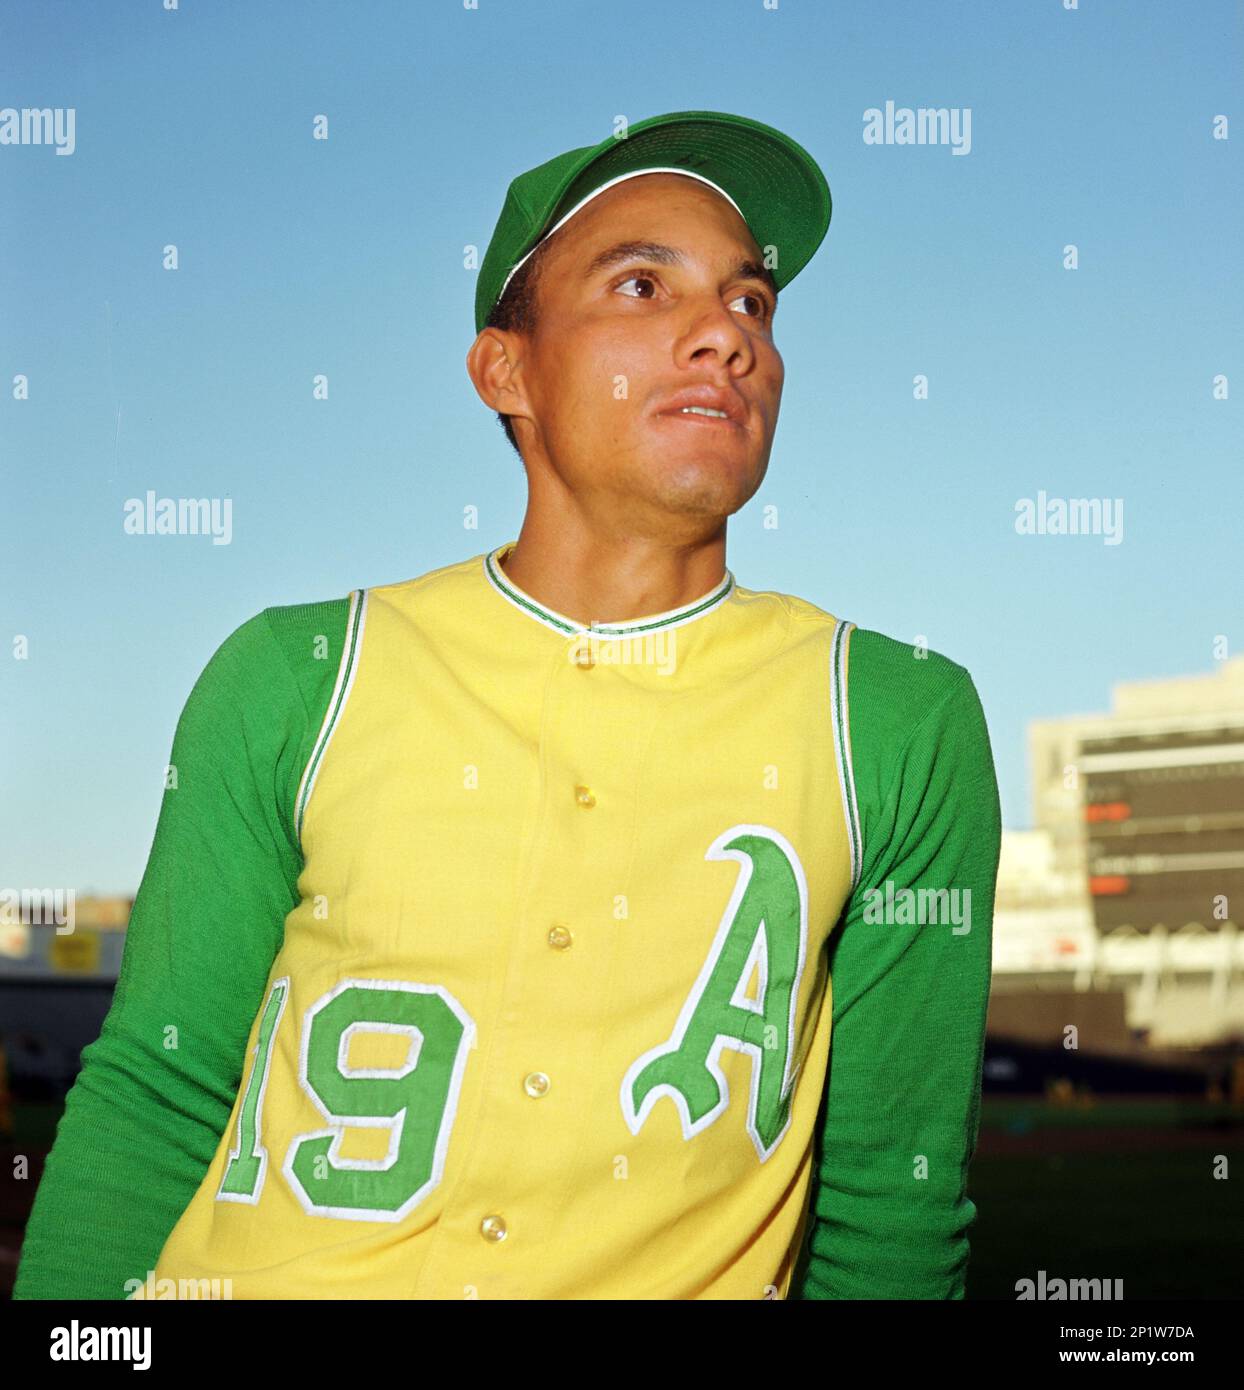 Oakland A's Bert Campaneris (19) during a game from his 1967 season with  the Oakland A's against the New York Yankees at Yankee Stadium in the  Bronx, New York. Bert Campaneris played